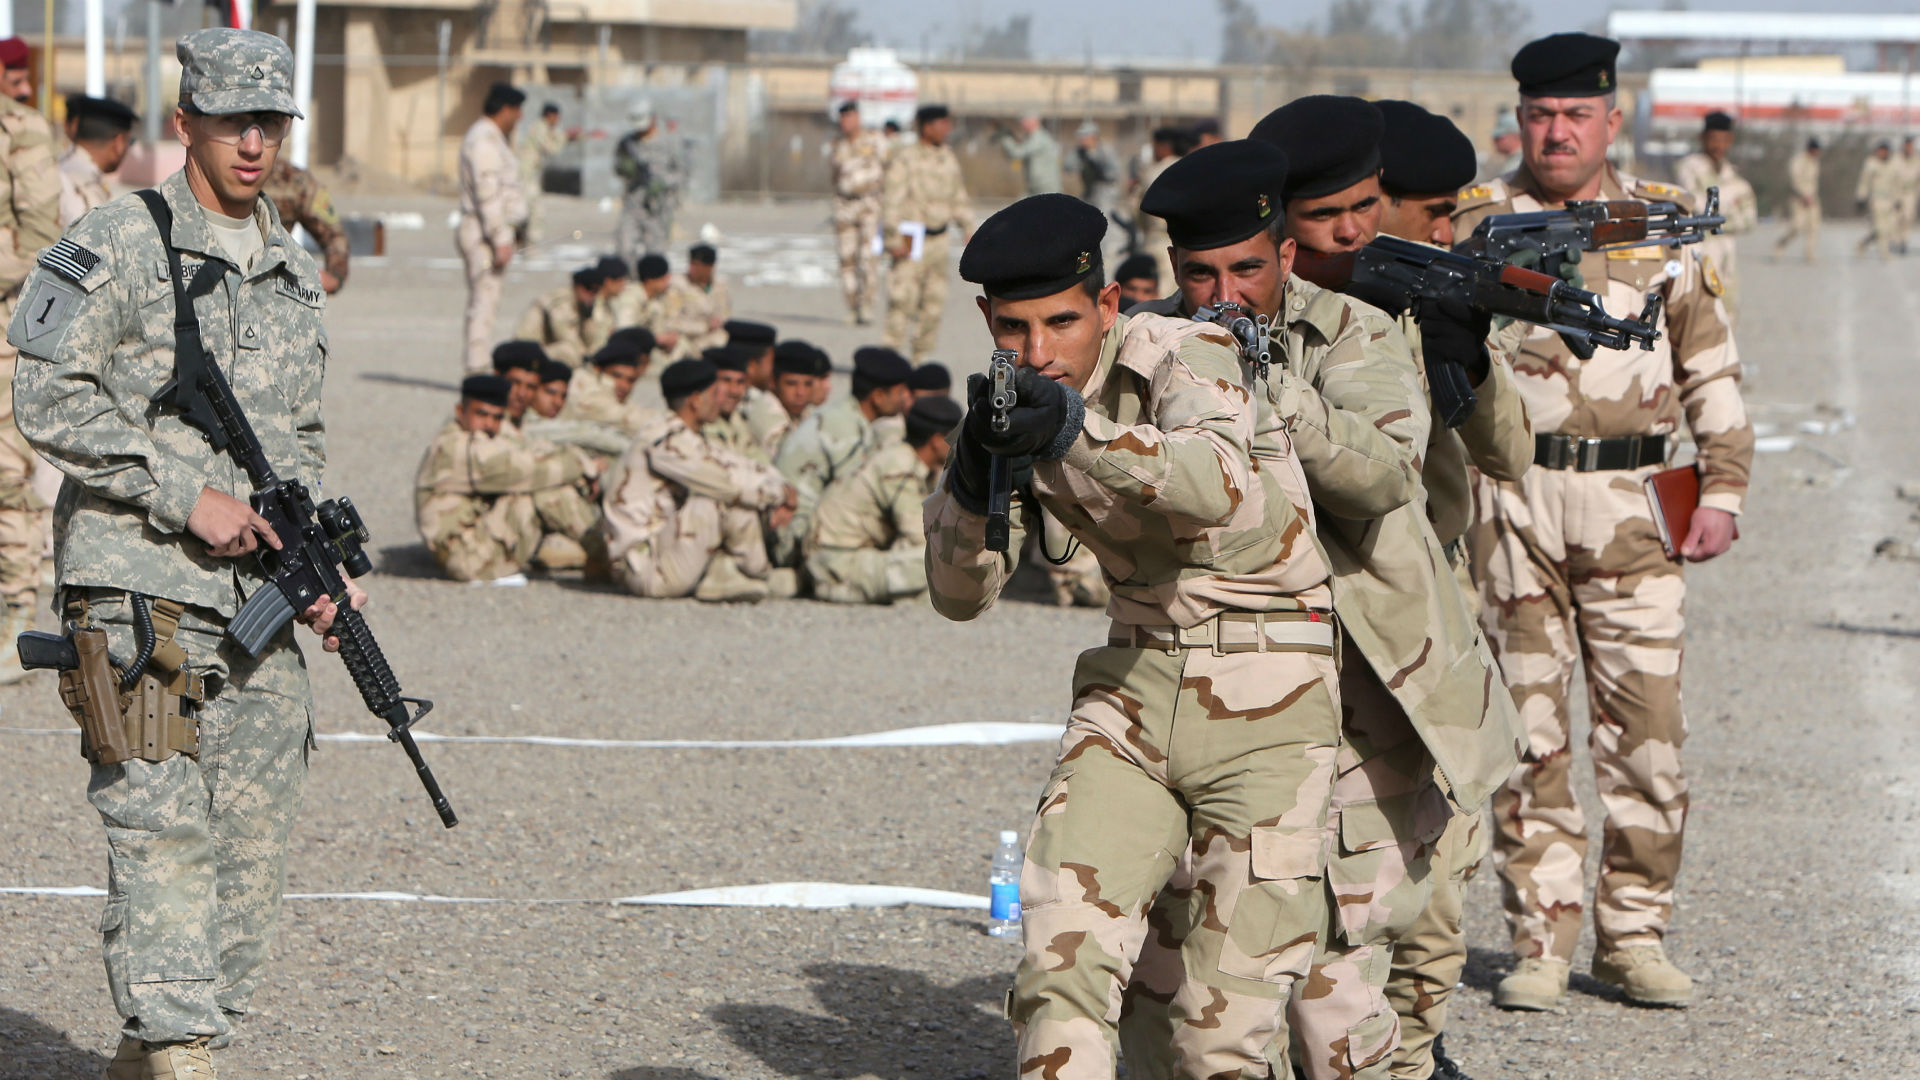 US troops are training Iraqi soldiers near Baghdad